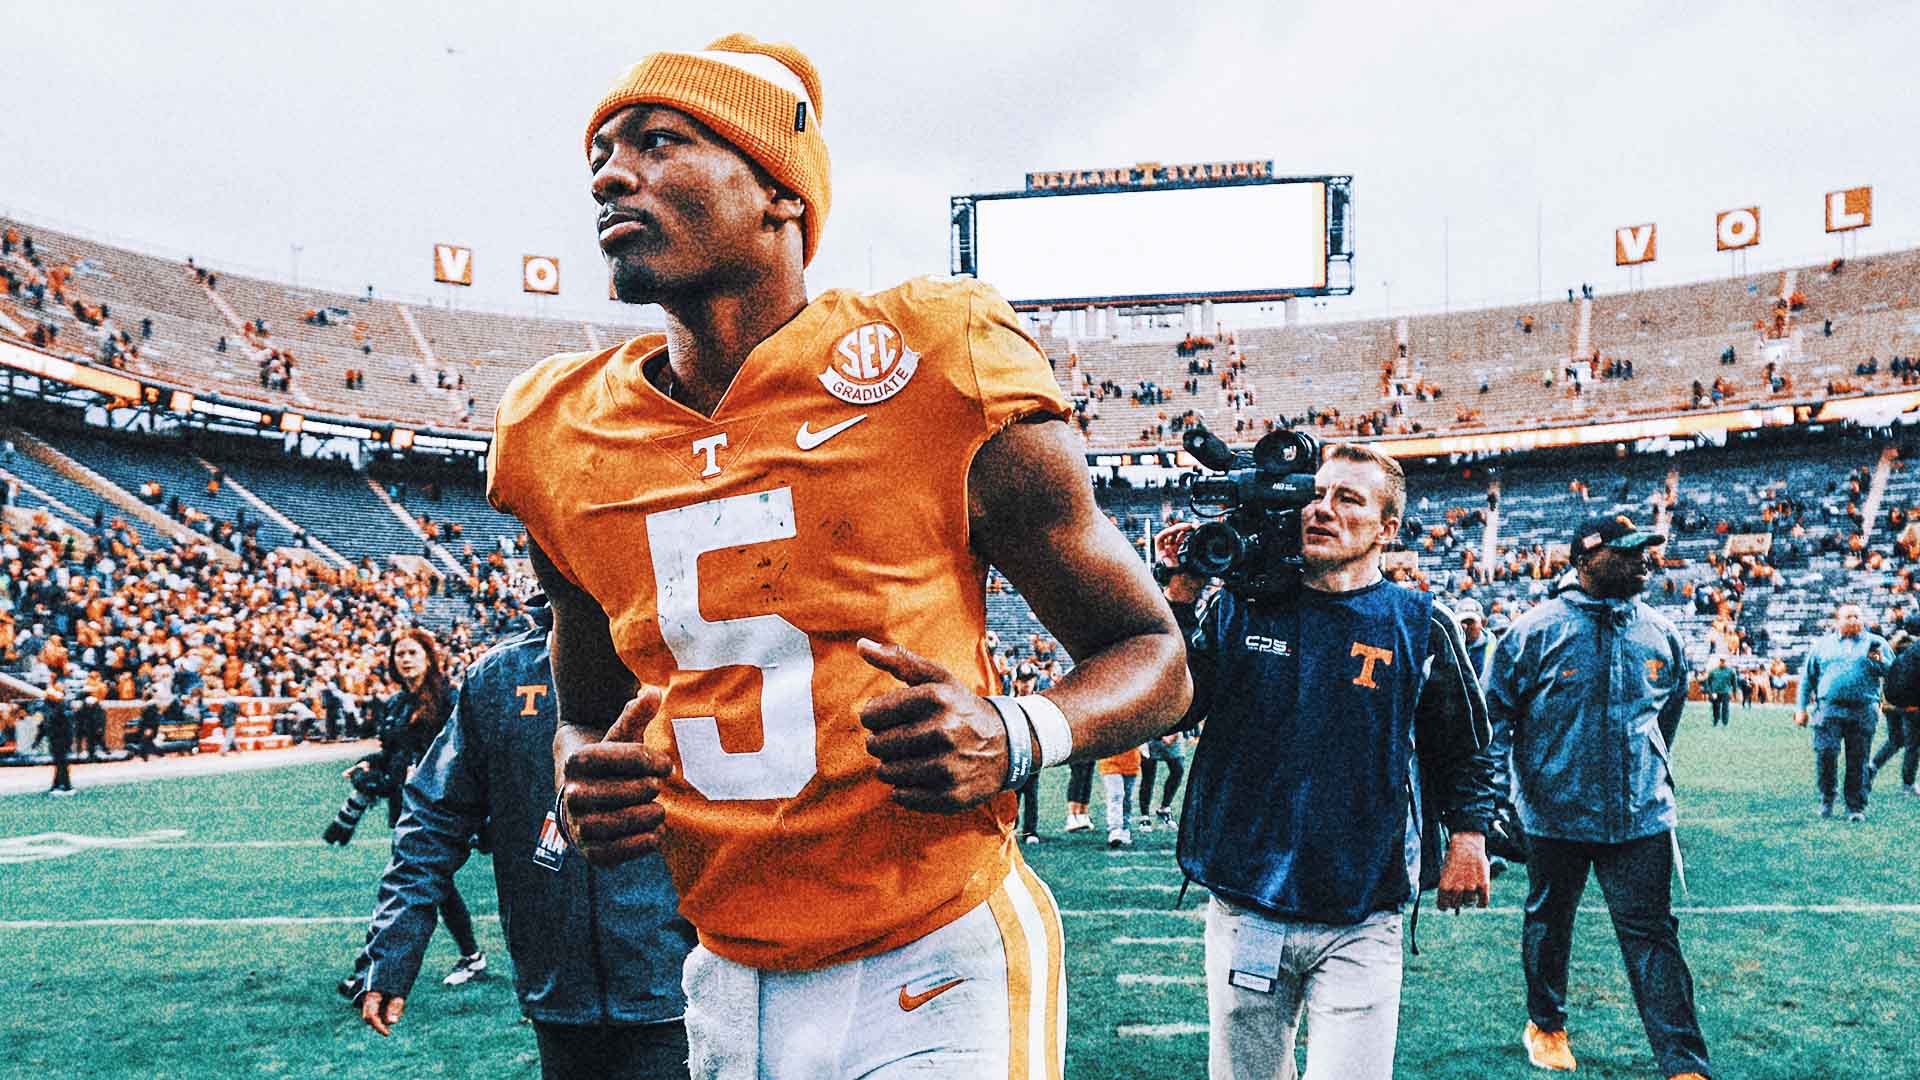 Hendon Hooker's season is done, but the legacy he left at Tennessee is secure